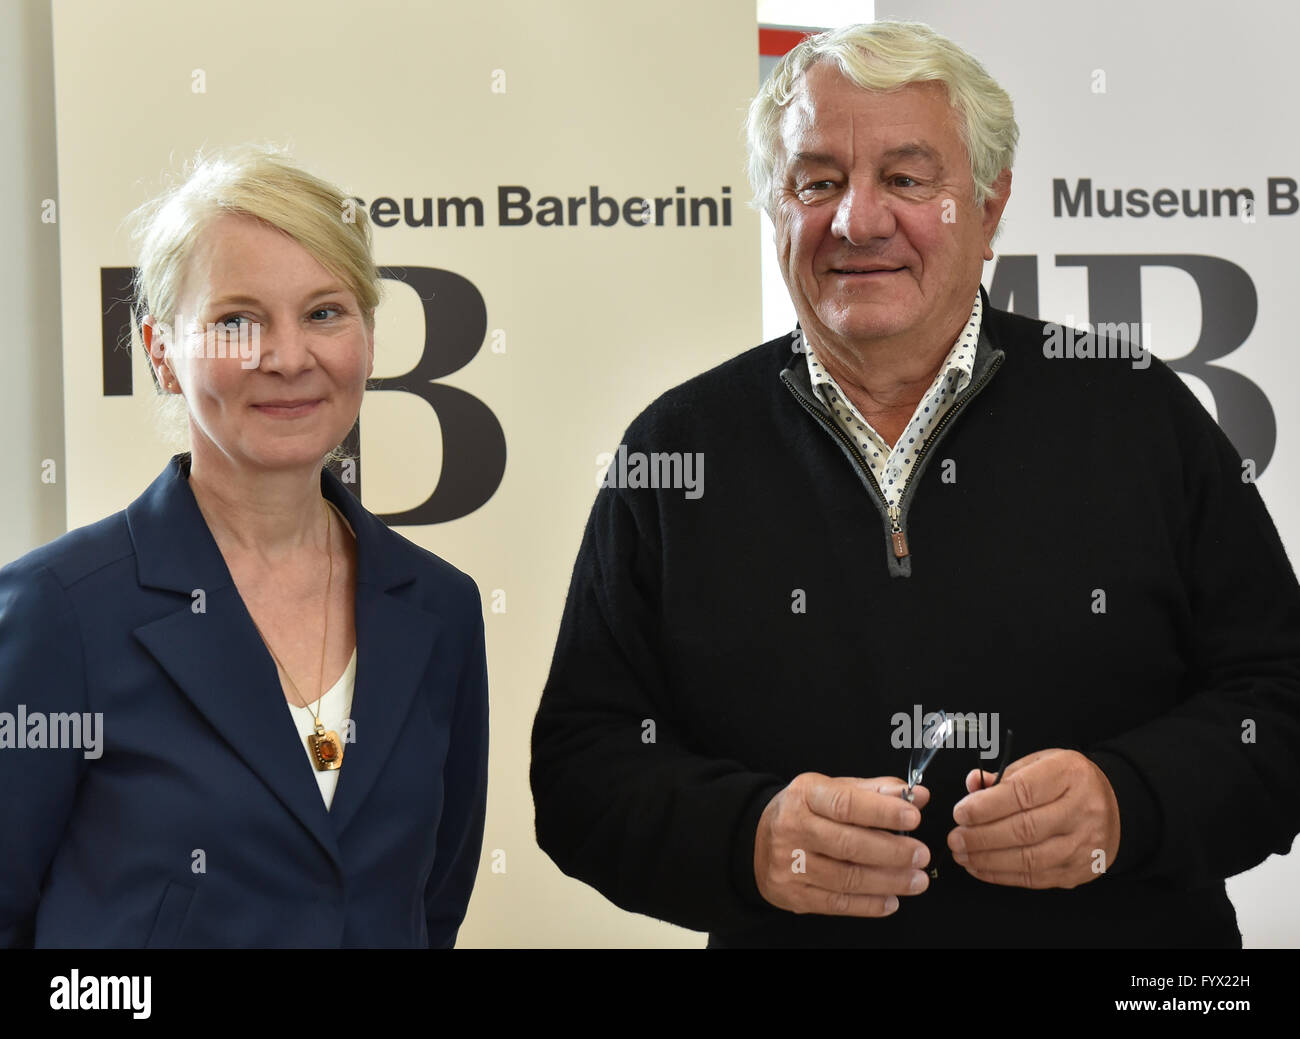 Art patron Hasso Plattner (R) poses next to museum director Ortrud Westheider in the lobby of the future Barberini Museum in Potsdam, Germany, 28 April 2016. Plattner and Westheider prestend the concept of the first exhibitions to be held in the museum scheduled to open in January 2017. Photo: BERND SETTNIK/dpa Stock Photo